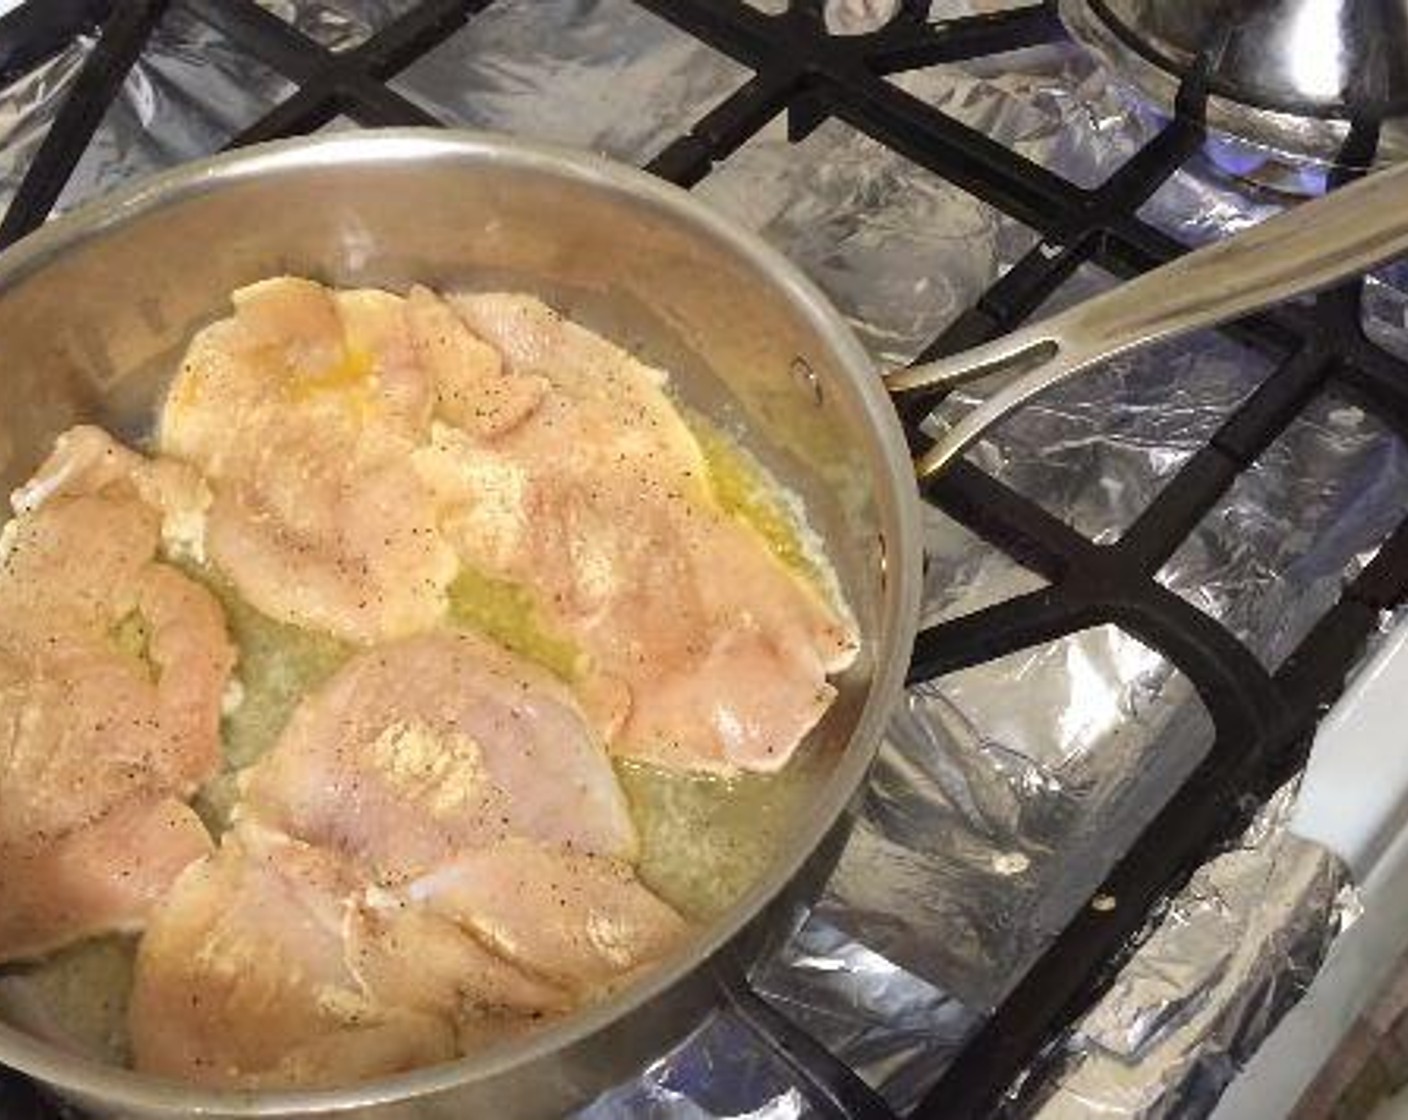 step 3 In a pan with high sides, over medium high heat, melt the Butter (1/4 cup). Add the chicken and cook for about 4 minutes on each side until cooked through. Remove chicken from the pan and cut into bite size pieces.